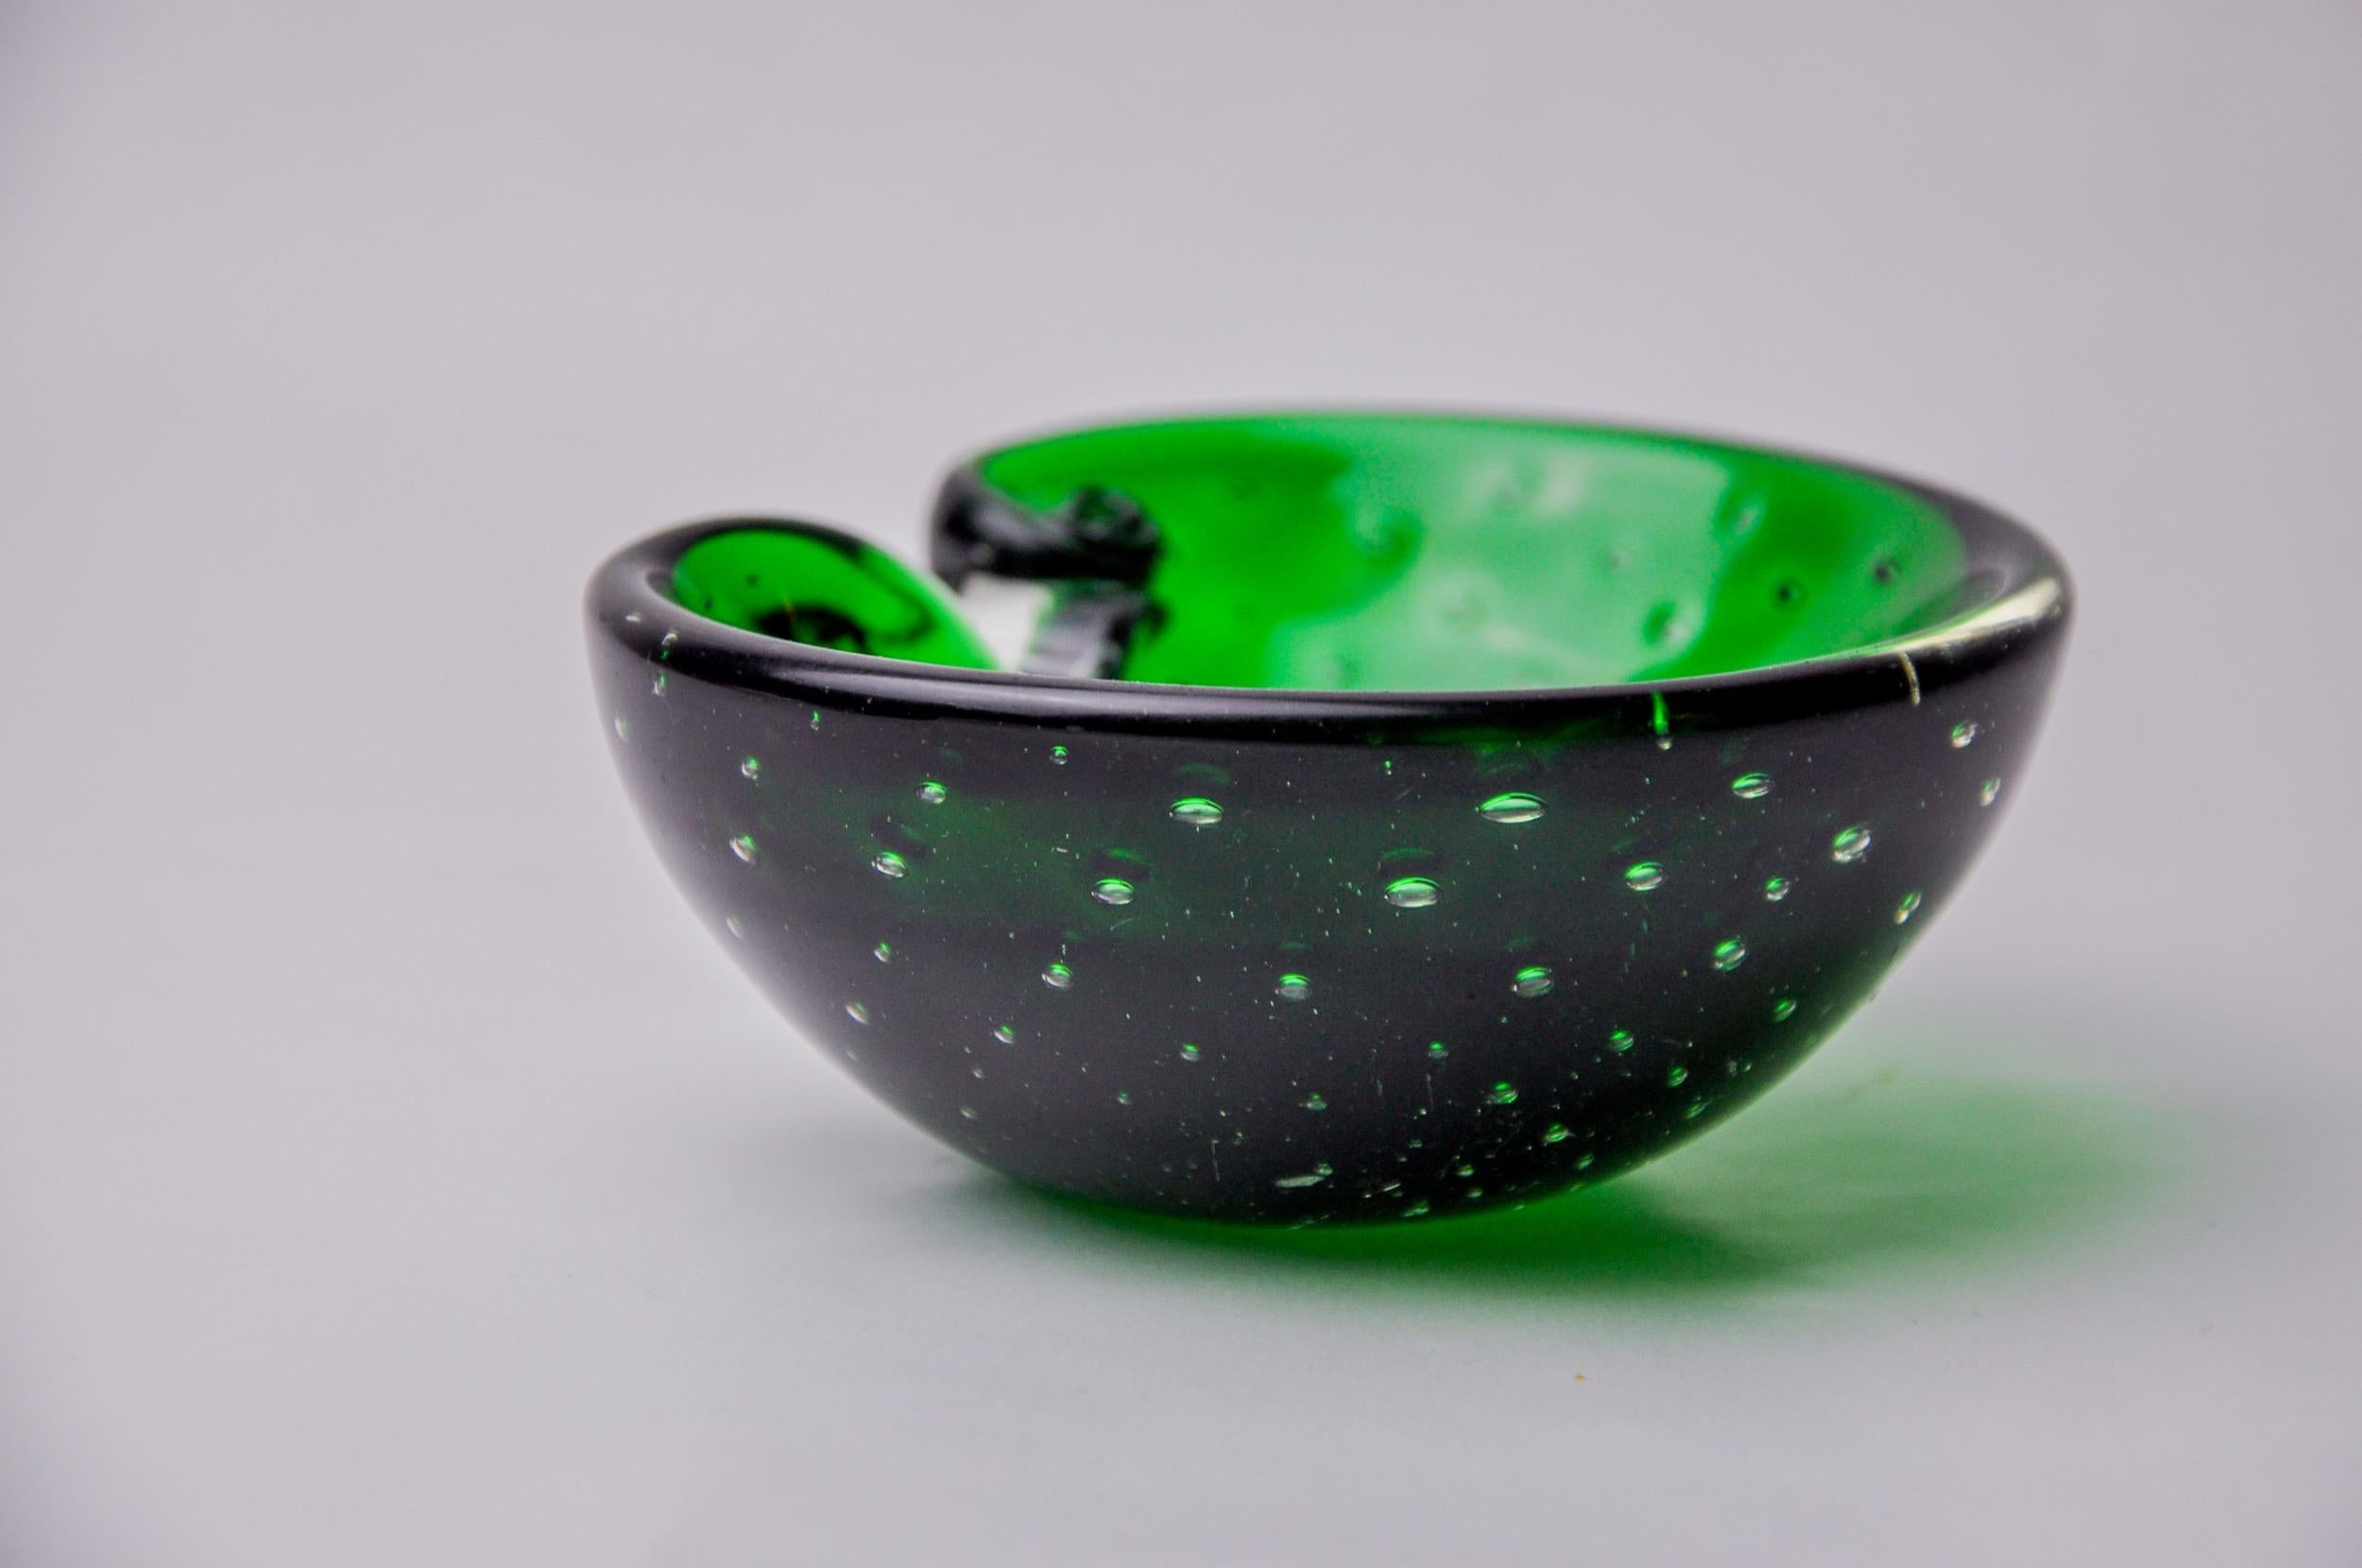 Superb and rare green Sommerso ashtray designed and manufactured for Seguso in Murano in the 1970s. Handcrafted glass work using the Sommerso technique (superposition of layers of molten glass). Magnificent object of collection and decoration. Very